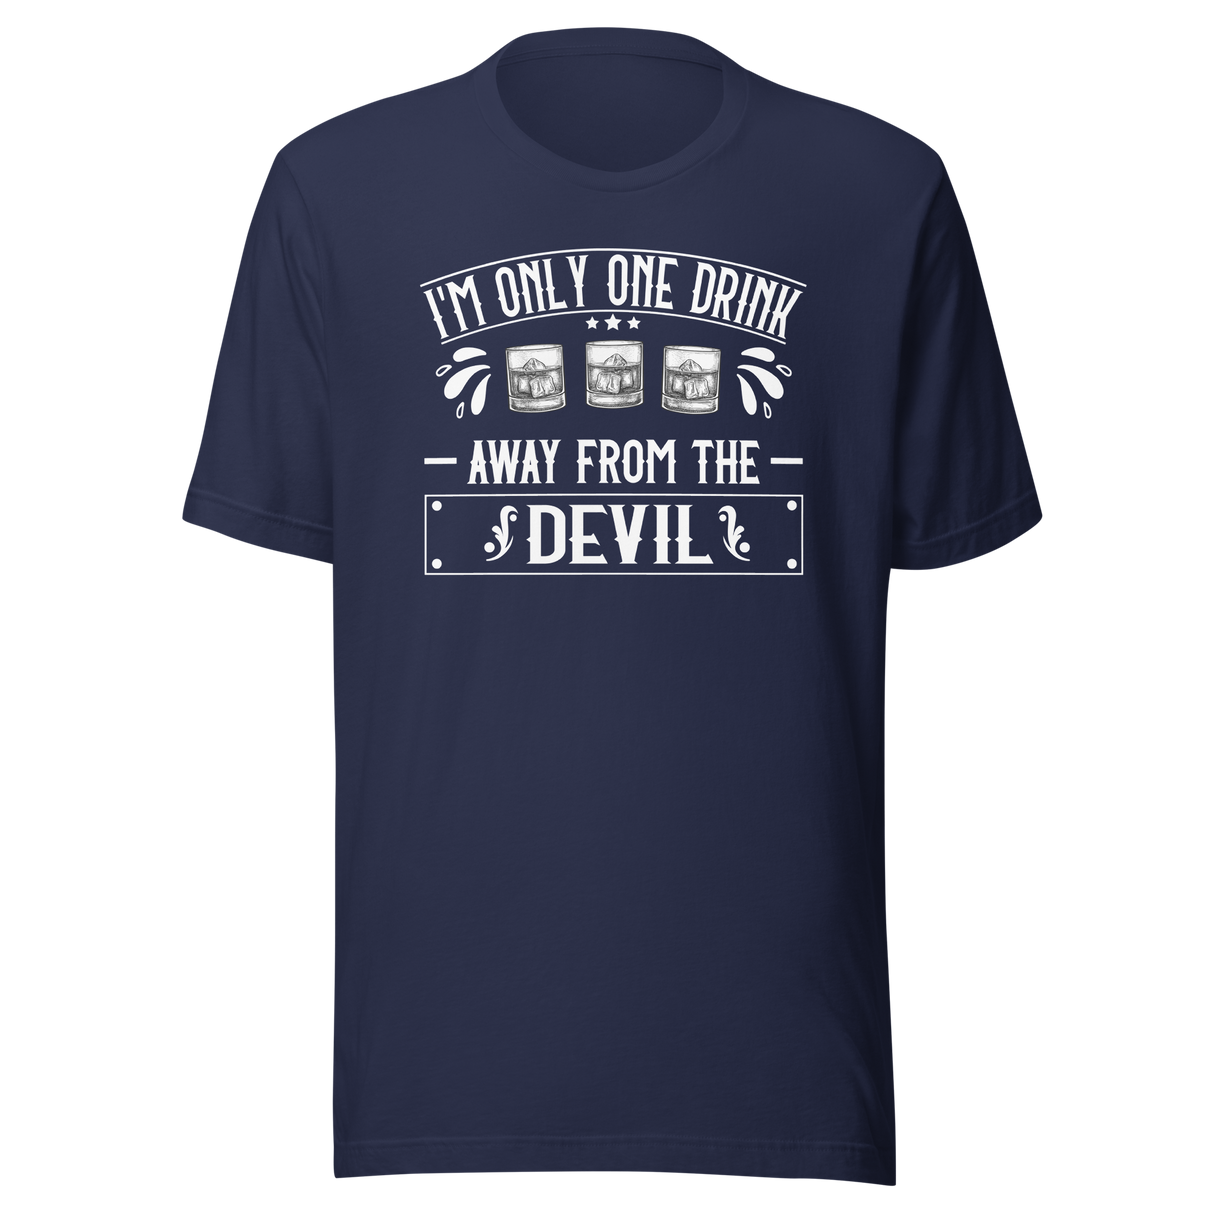 im-only-one-drink-away-from-the-devil-food-tee-life-t-shirt-sassy-tee-funny-t-shirt-quirky-tee#color_navy